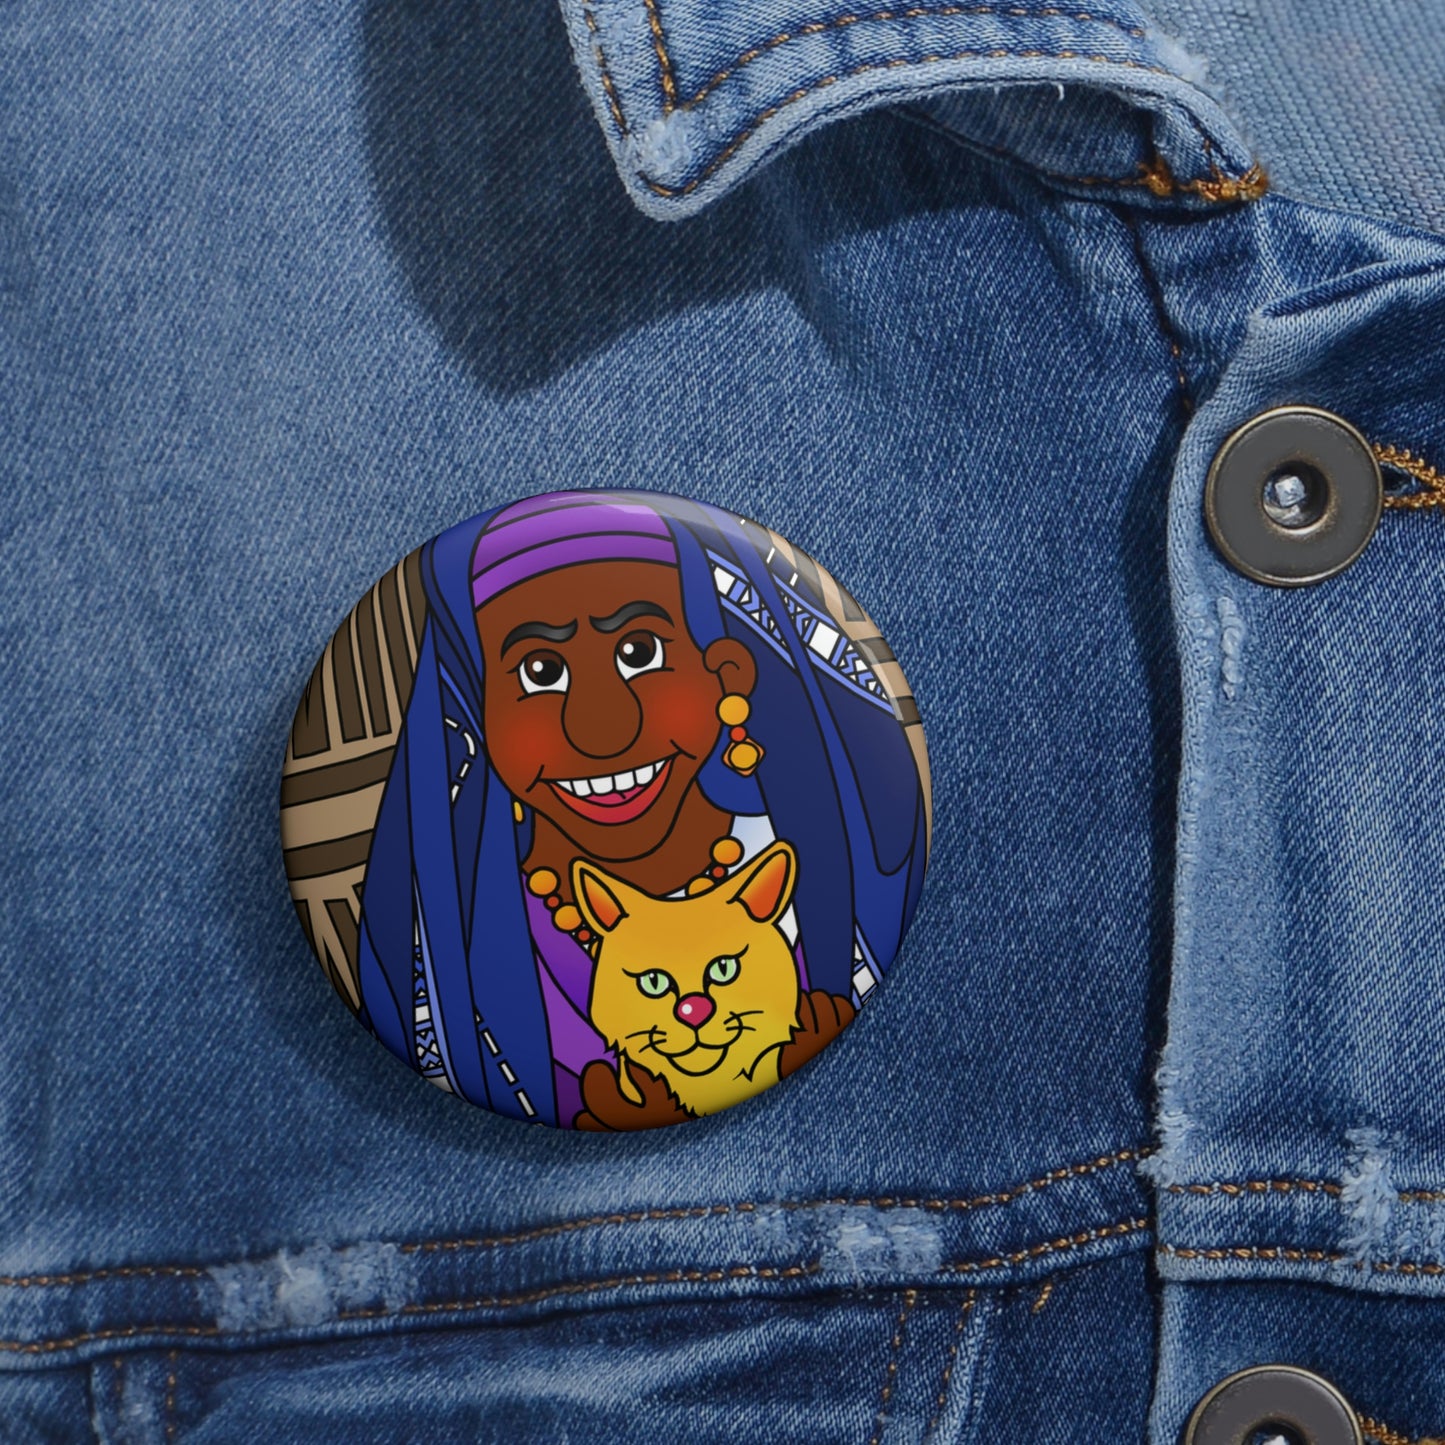 The Kitty Cat Cried Custom Pin Buttons